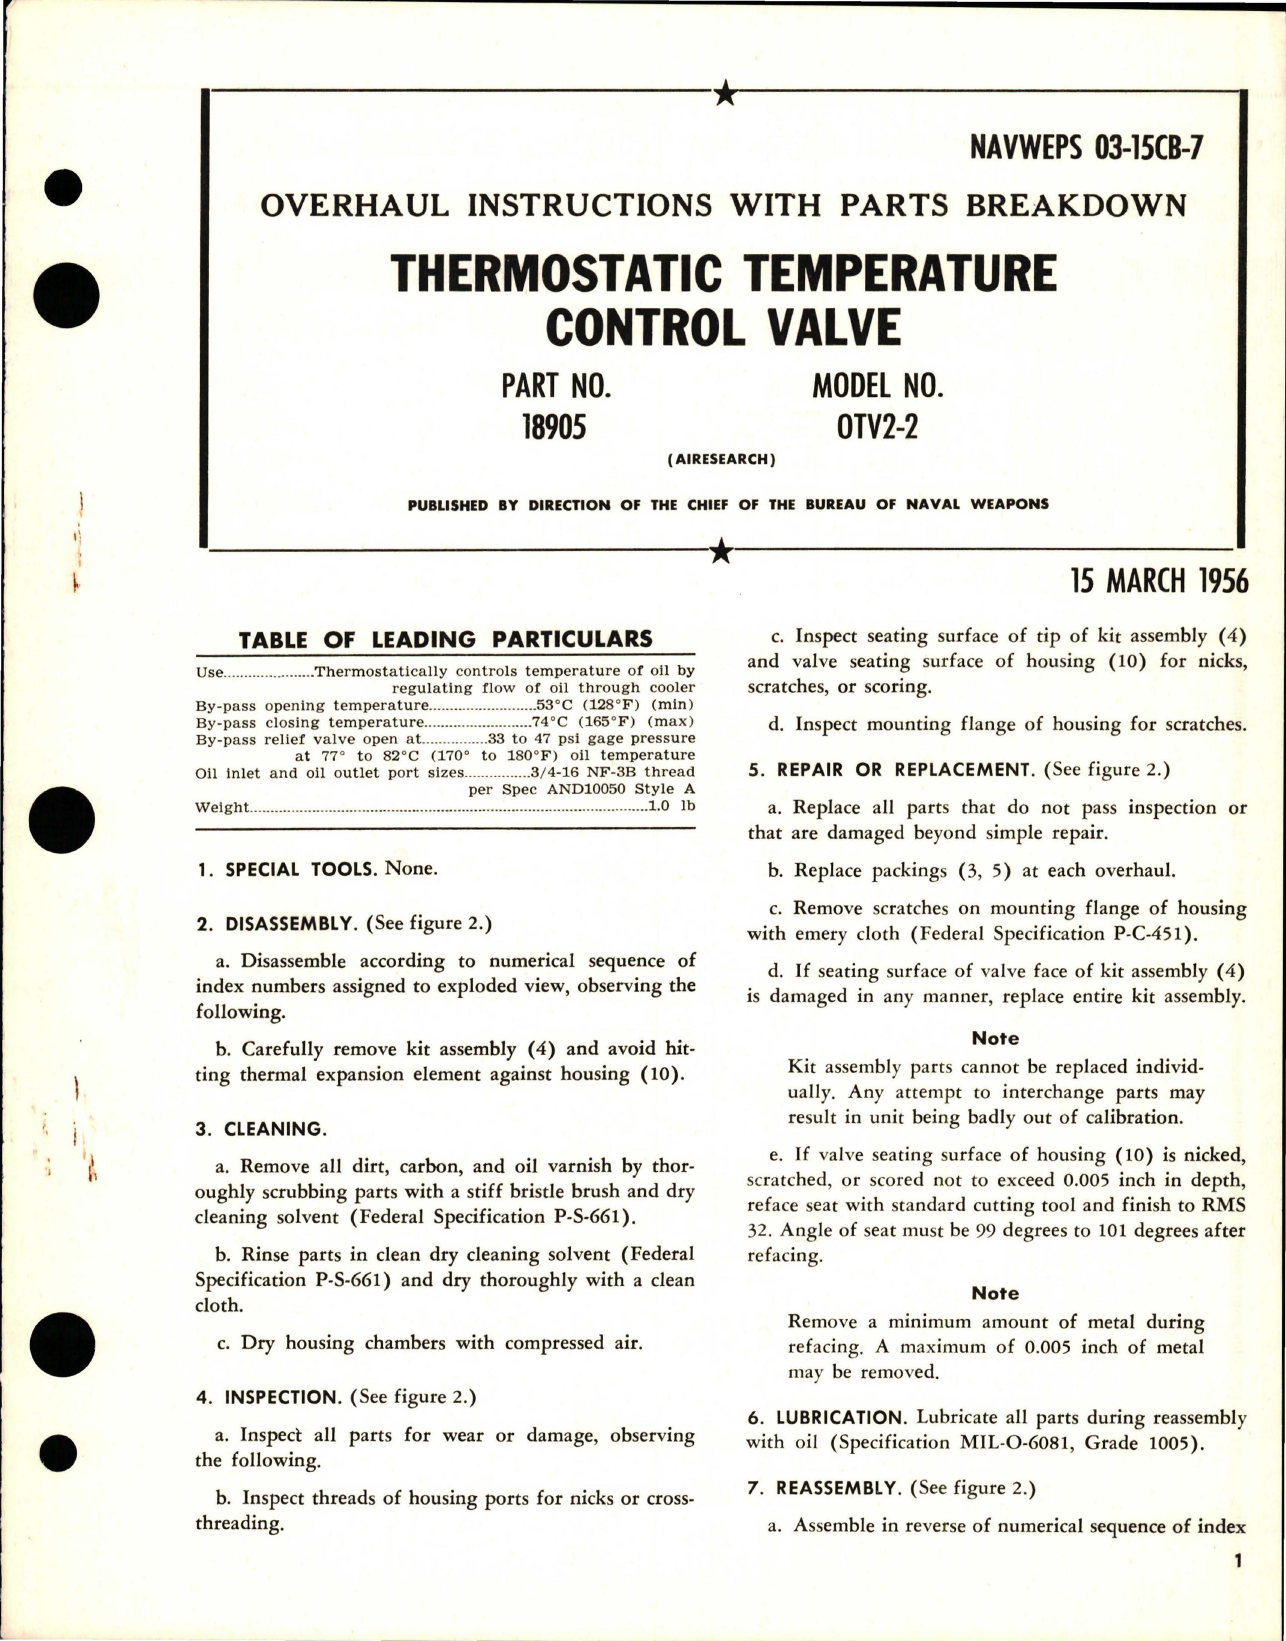 Sample page 1 from AirCorps Library document: Overhaul Instructions with Parts Breakdown for Thermostatic Temperature Control Valve - Part 18905 - Model OTV2-2